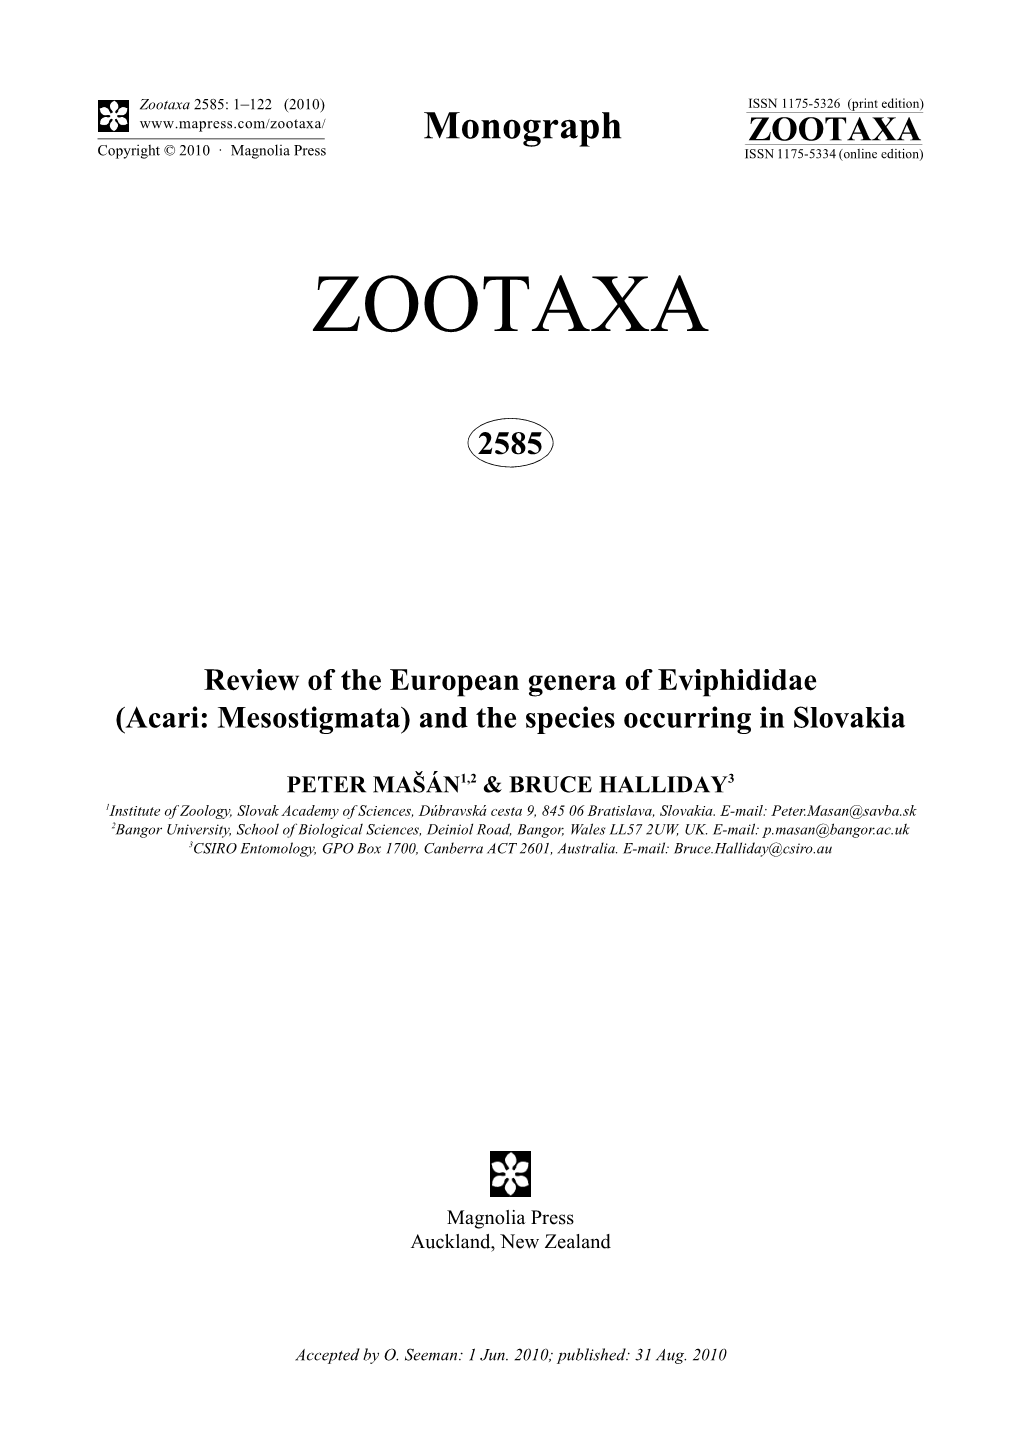 Zootaxa, Review of the European Genera of Eviphididae